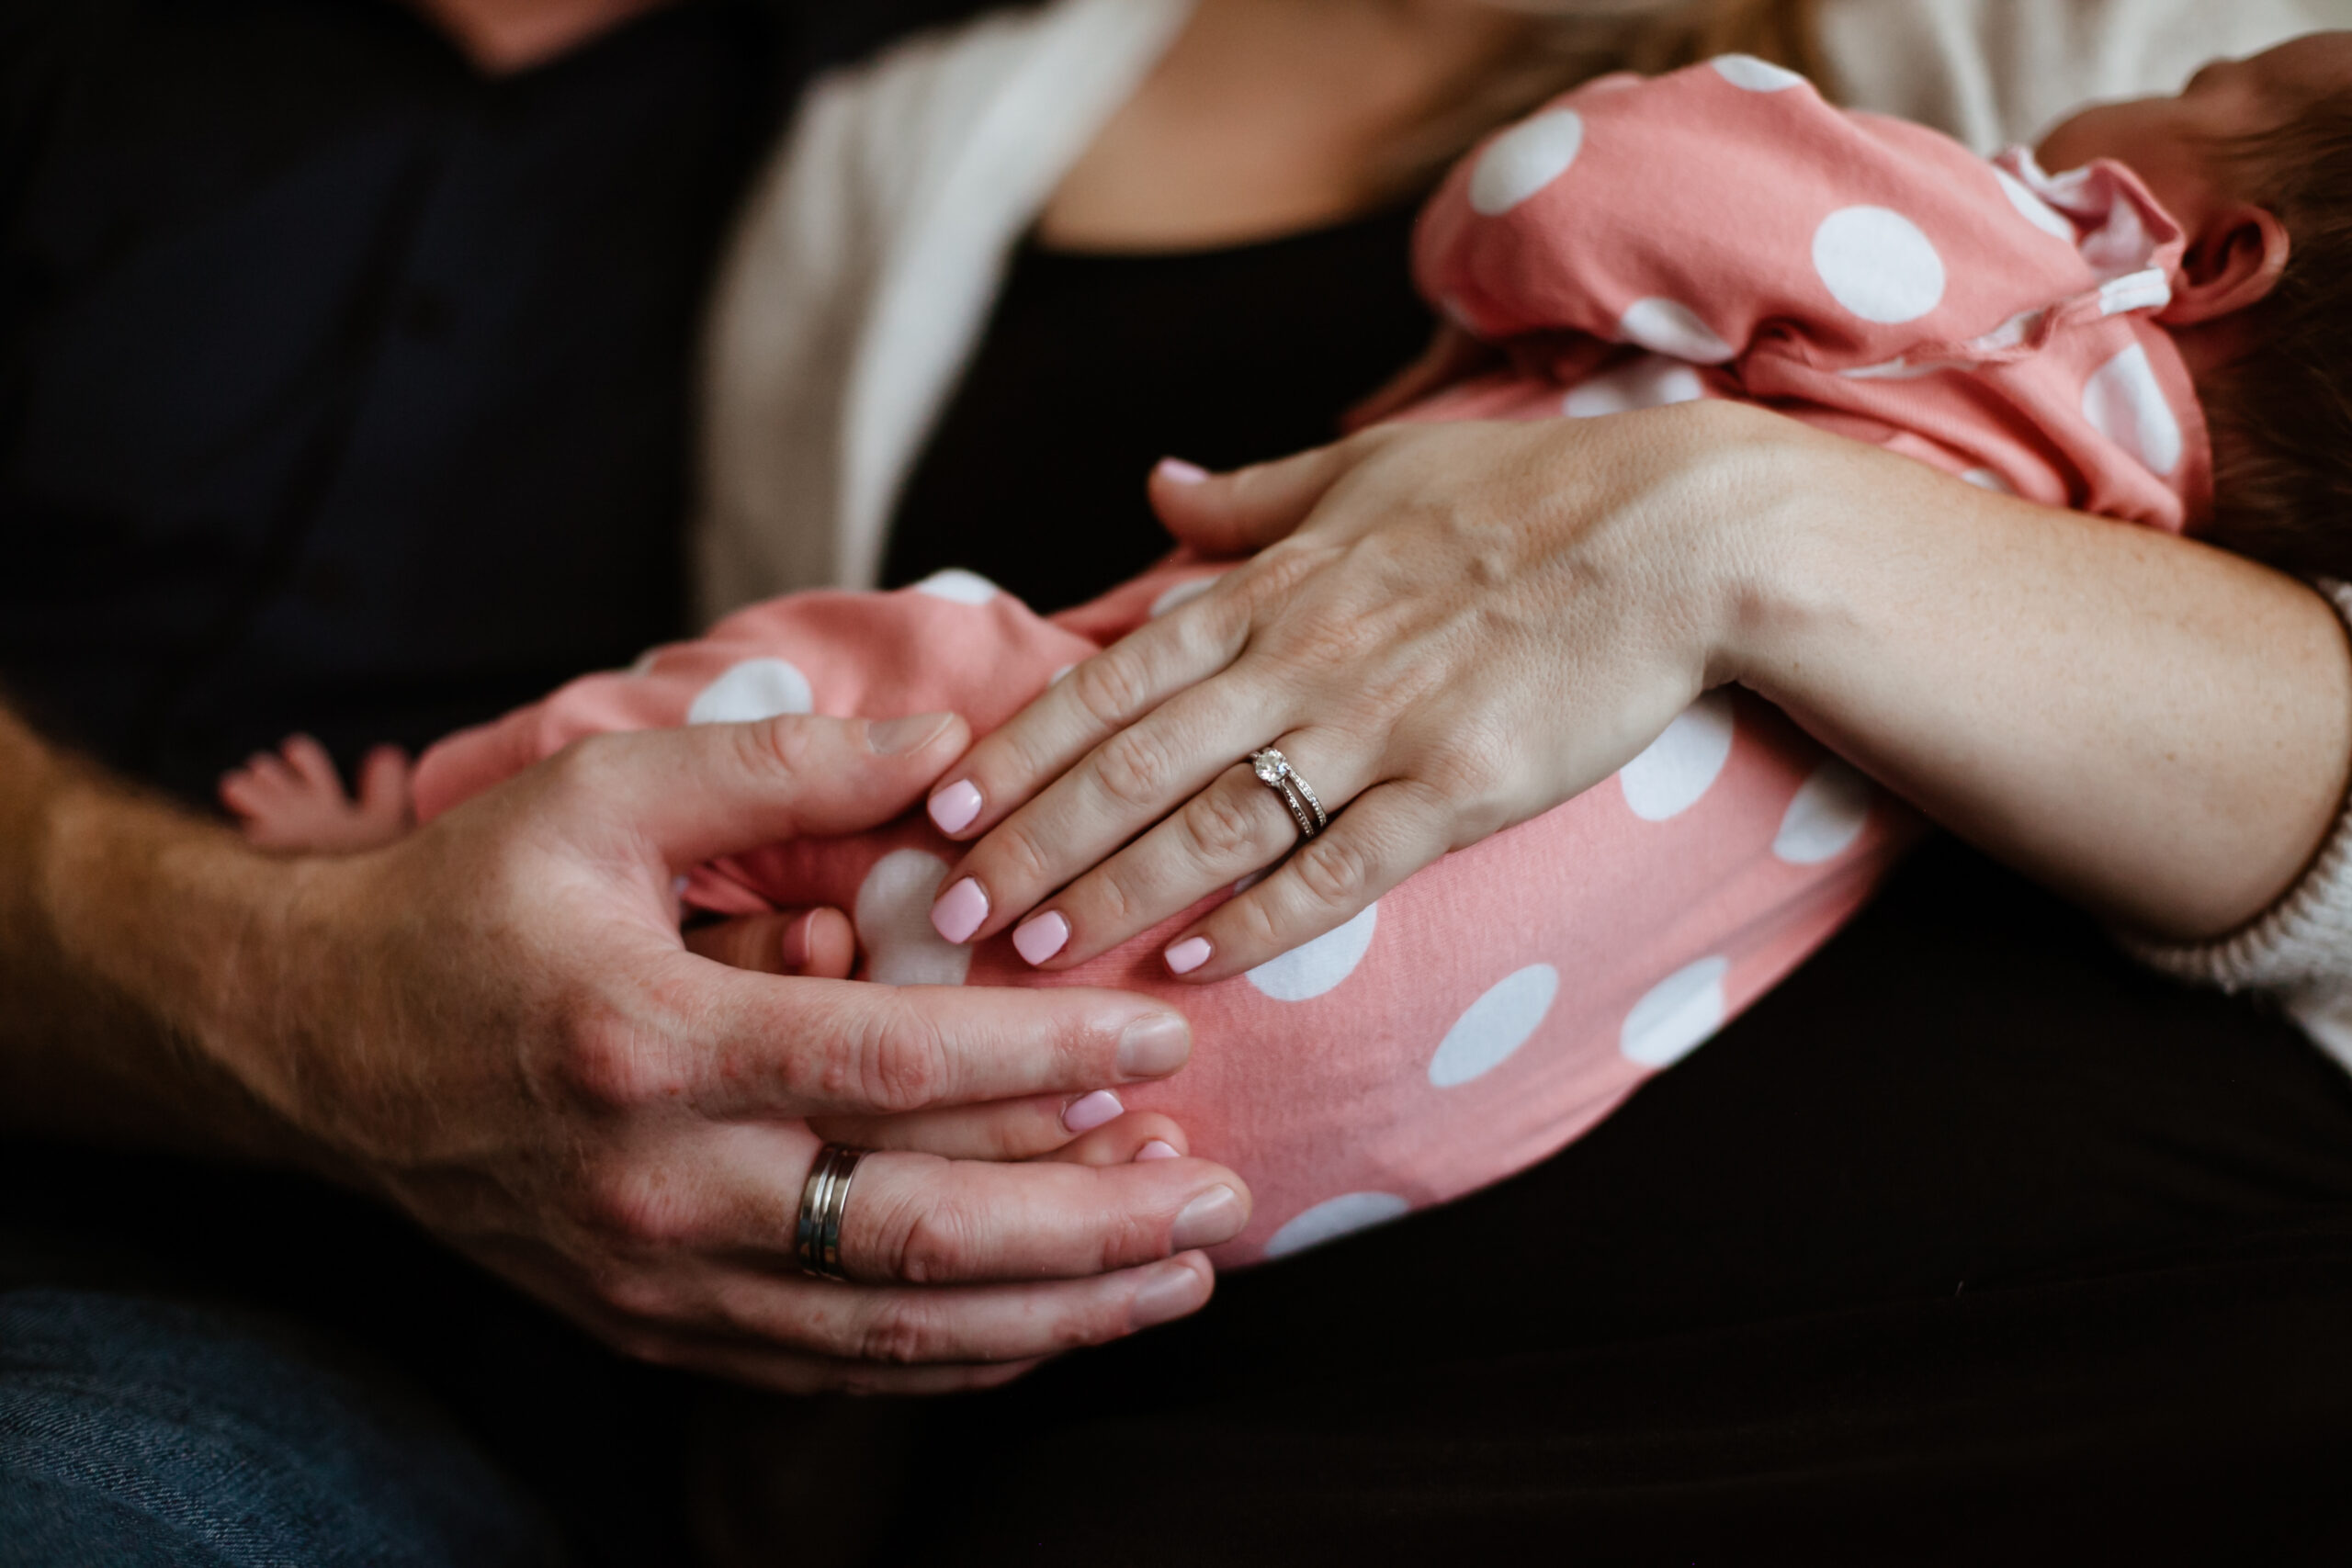 Father and Mother's hands hold newborn baby